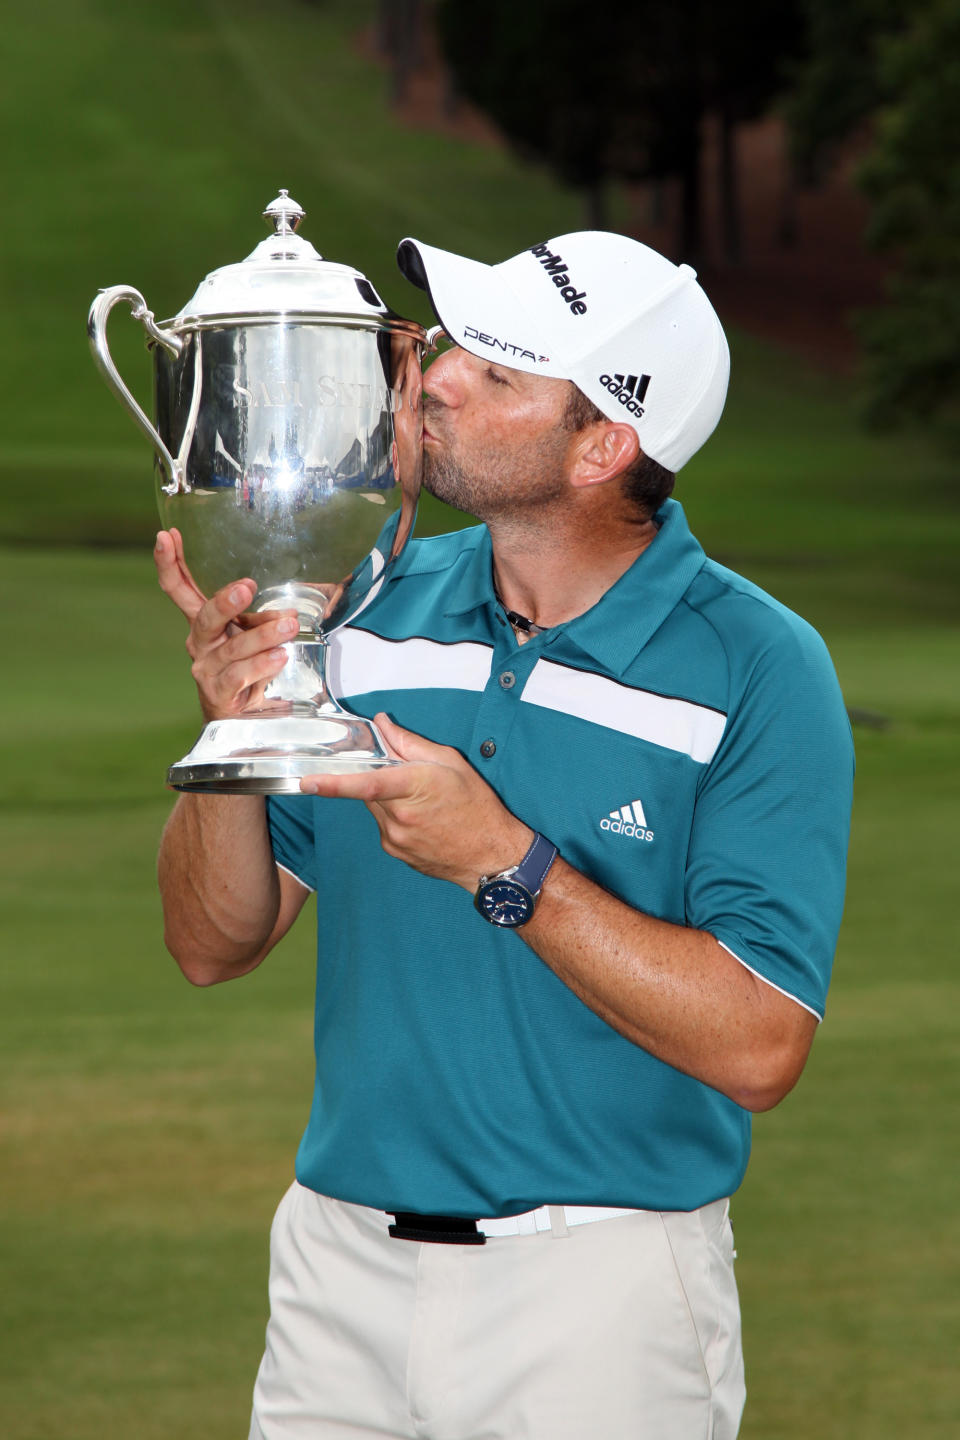 GREENSBORO, NC - AUGUST 20: Sergio Garcia of Spain holds the Sam Snead Cup after winning the Wyndham Championship at Sedgefield Country Club on August 20, 2012 in Greensboro, North Carolina. (Photo by Hunter Martin/Getty Images)